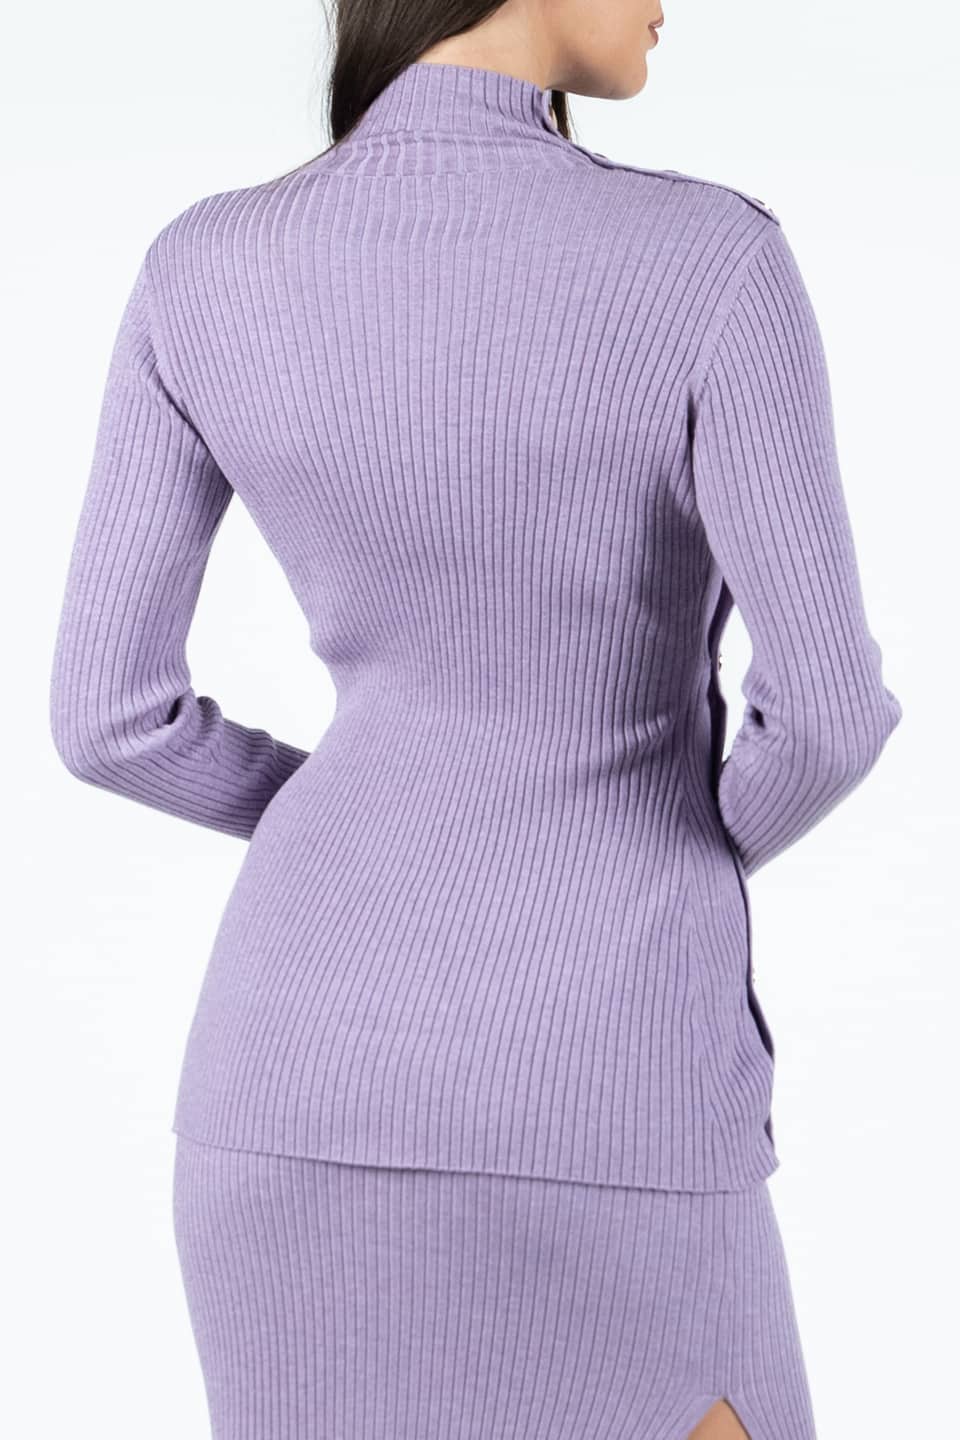 Thumbnail for Product gallery 4, Shuki Top Violet